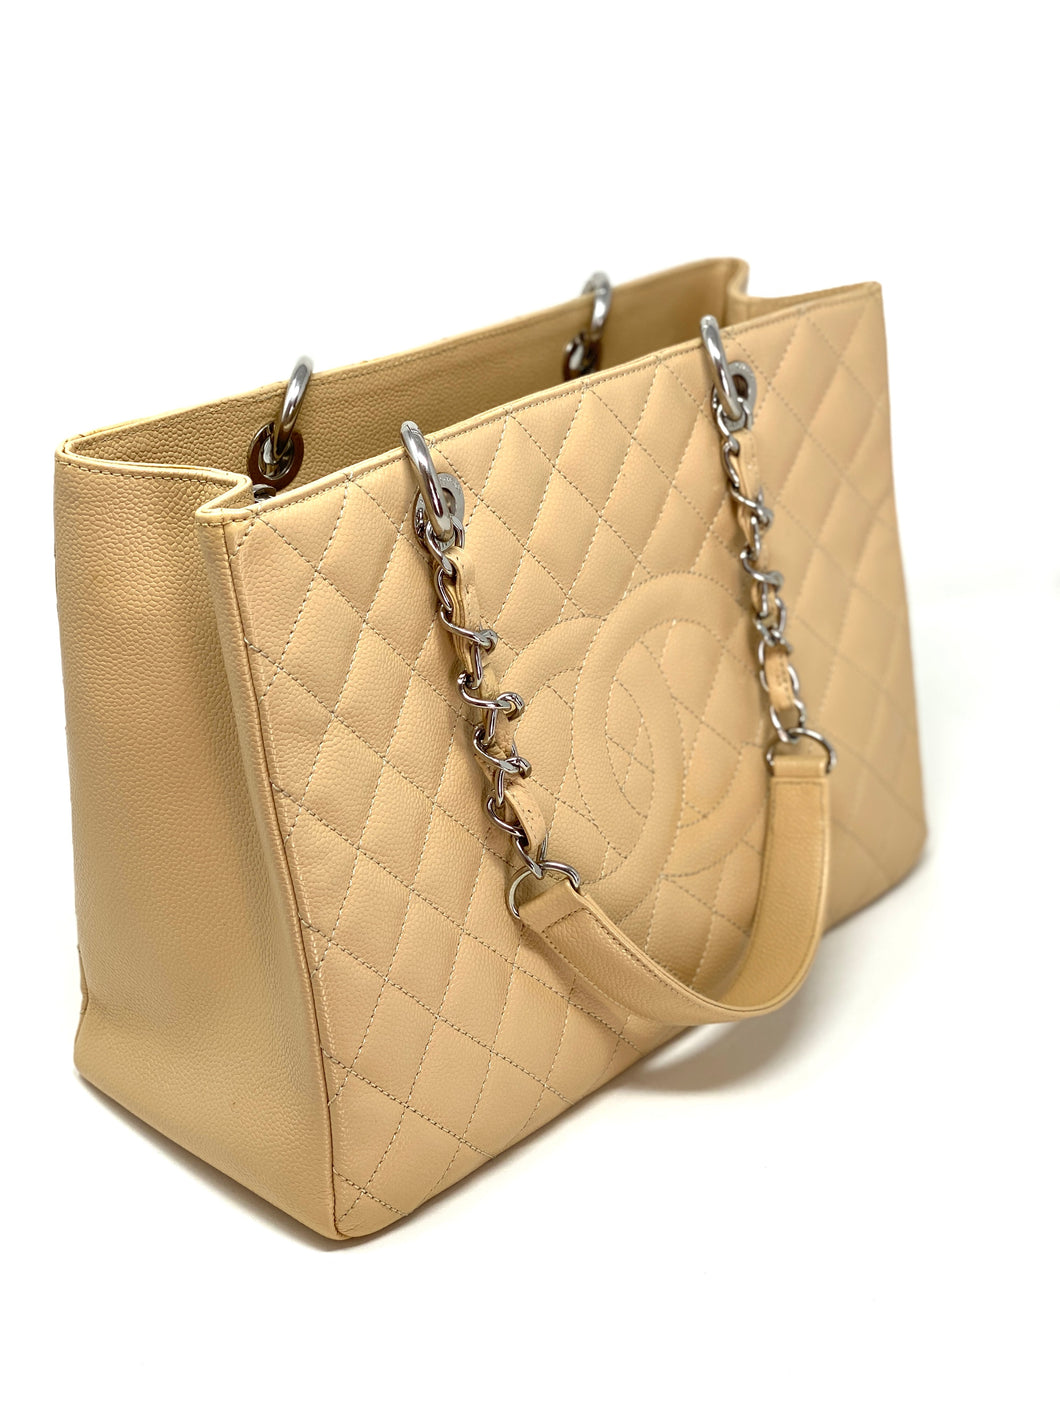 CHANEL Grand Shopping GST Caviar Leather Tote Bag Beige